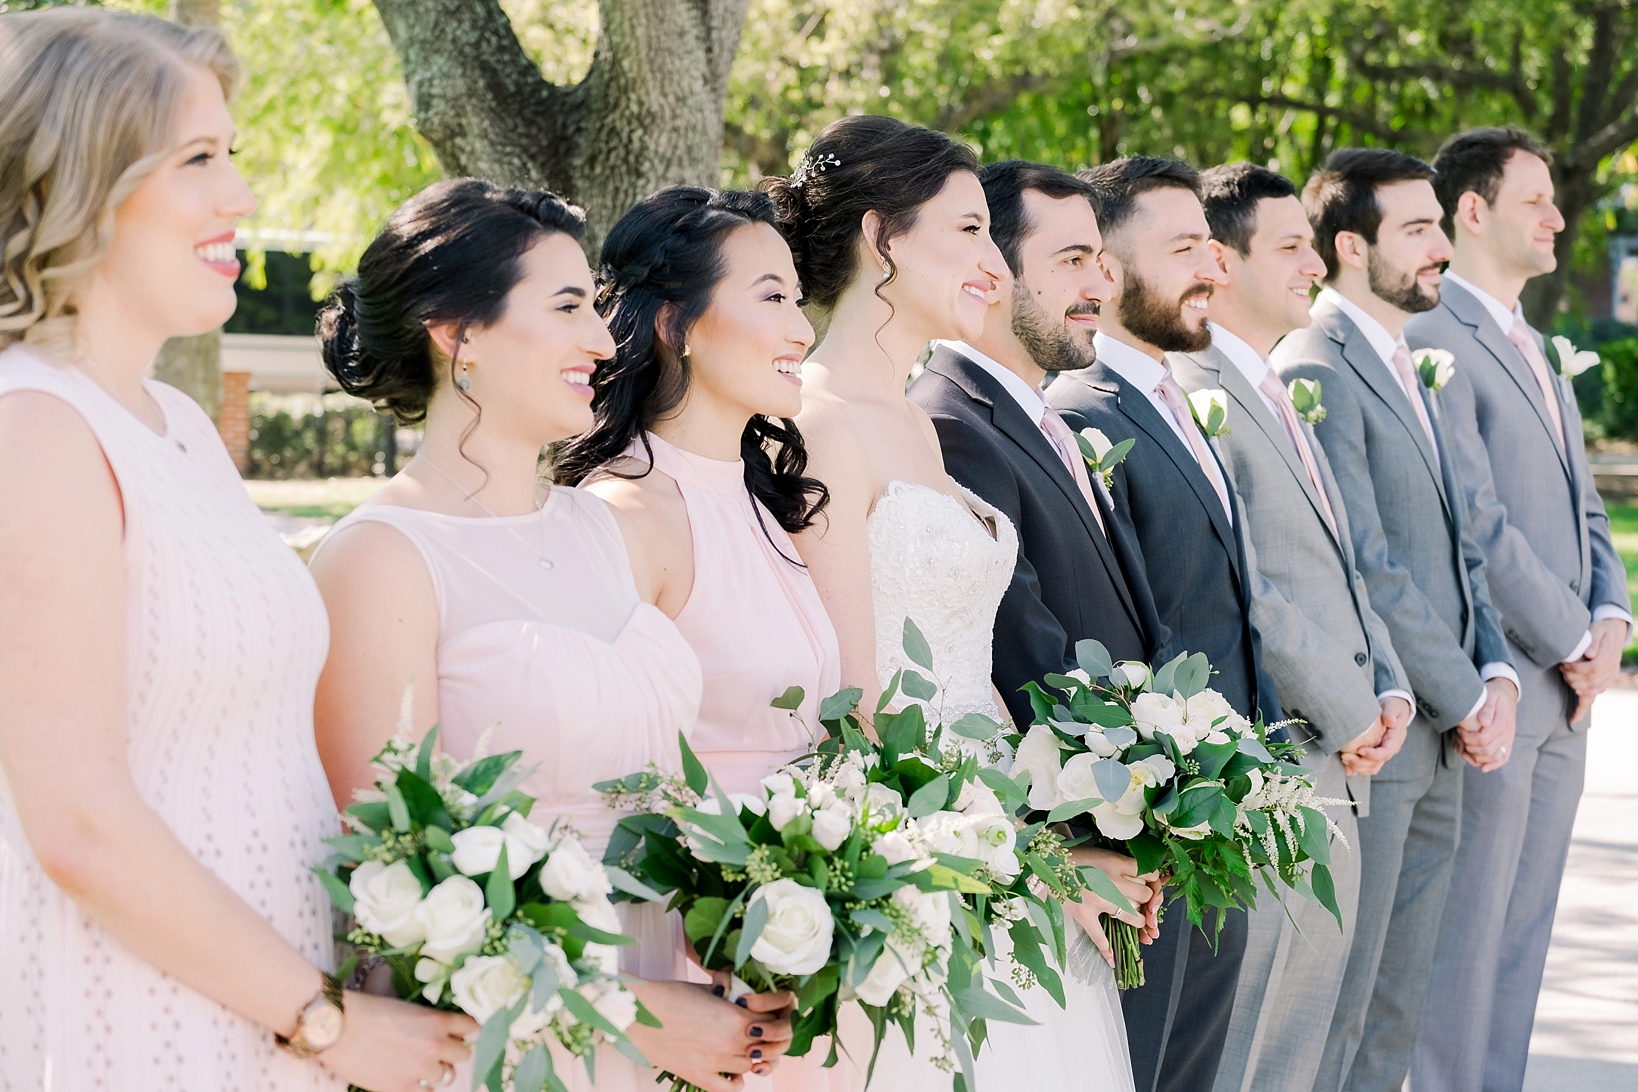 Unique photo of the wedding party on the UT campus in Tampa, FL